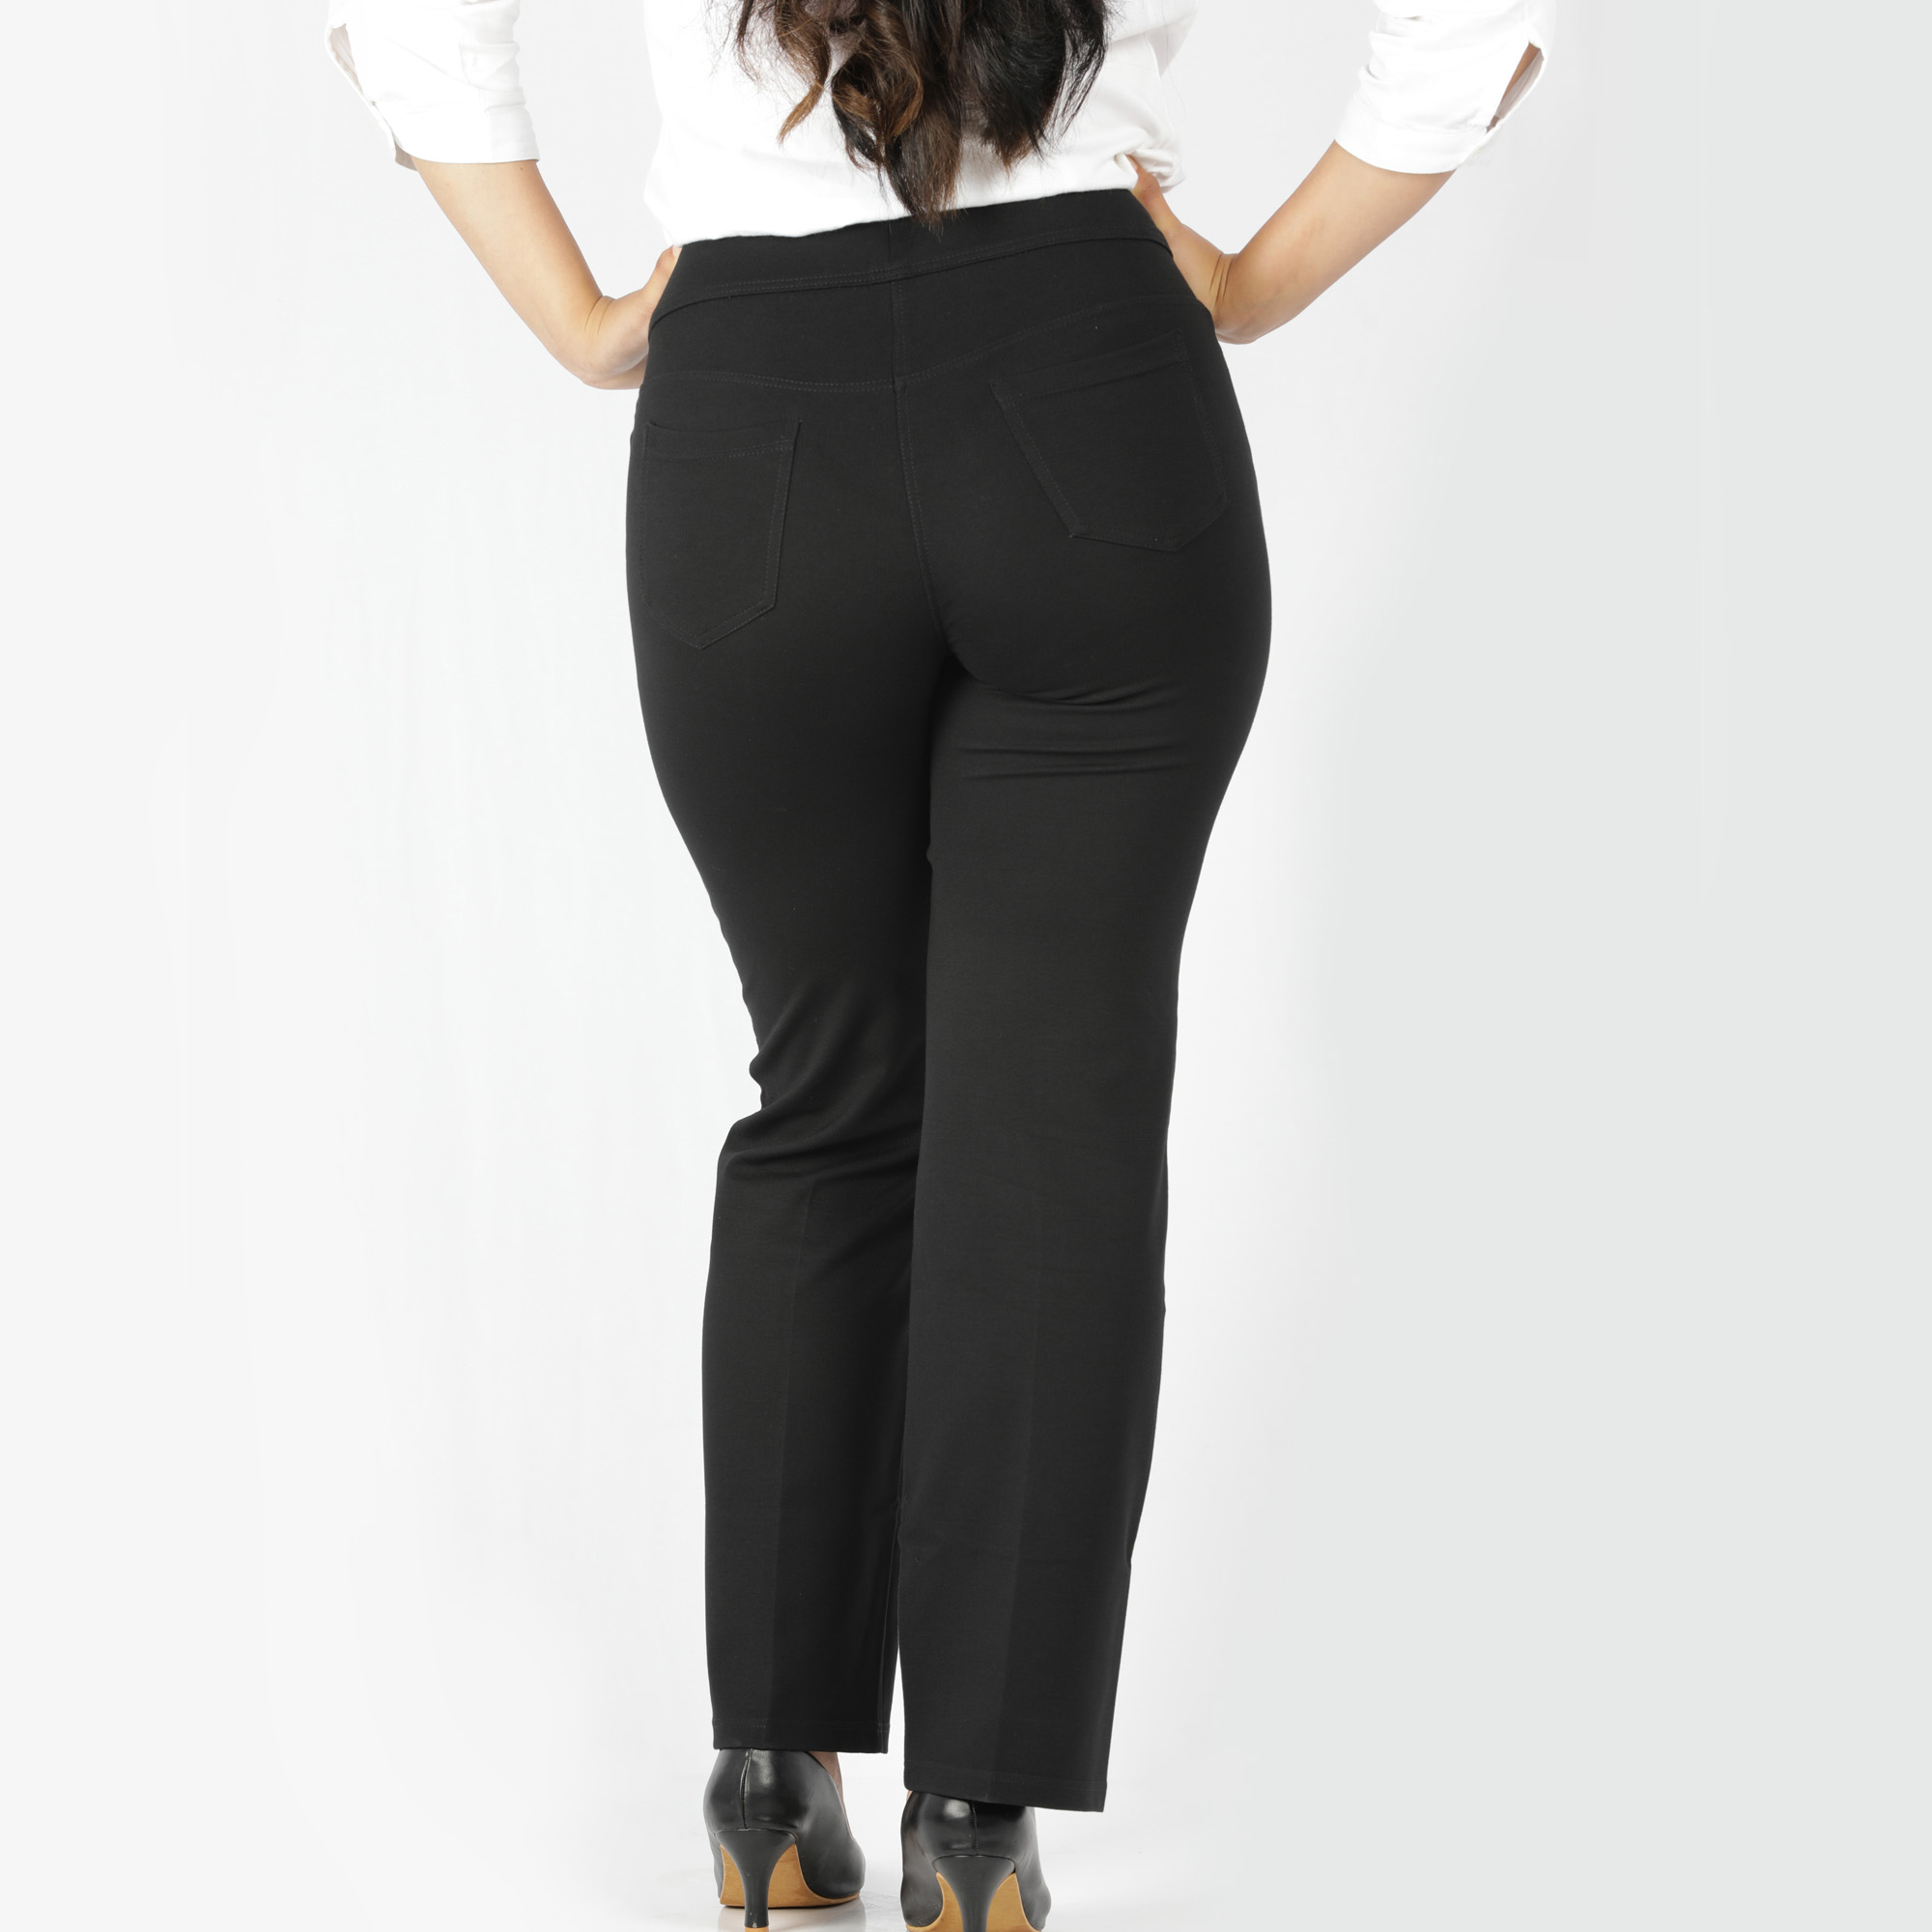 Buy Pearl Tummy Tuck Palazzo Pants Women Online in India - Etsy